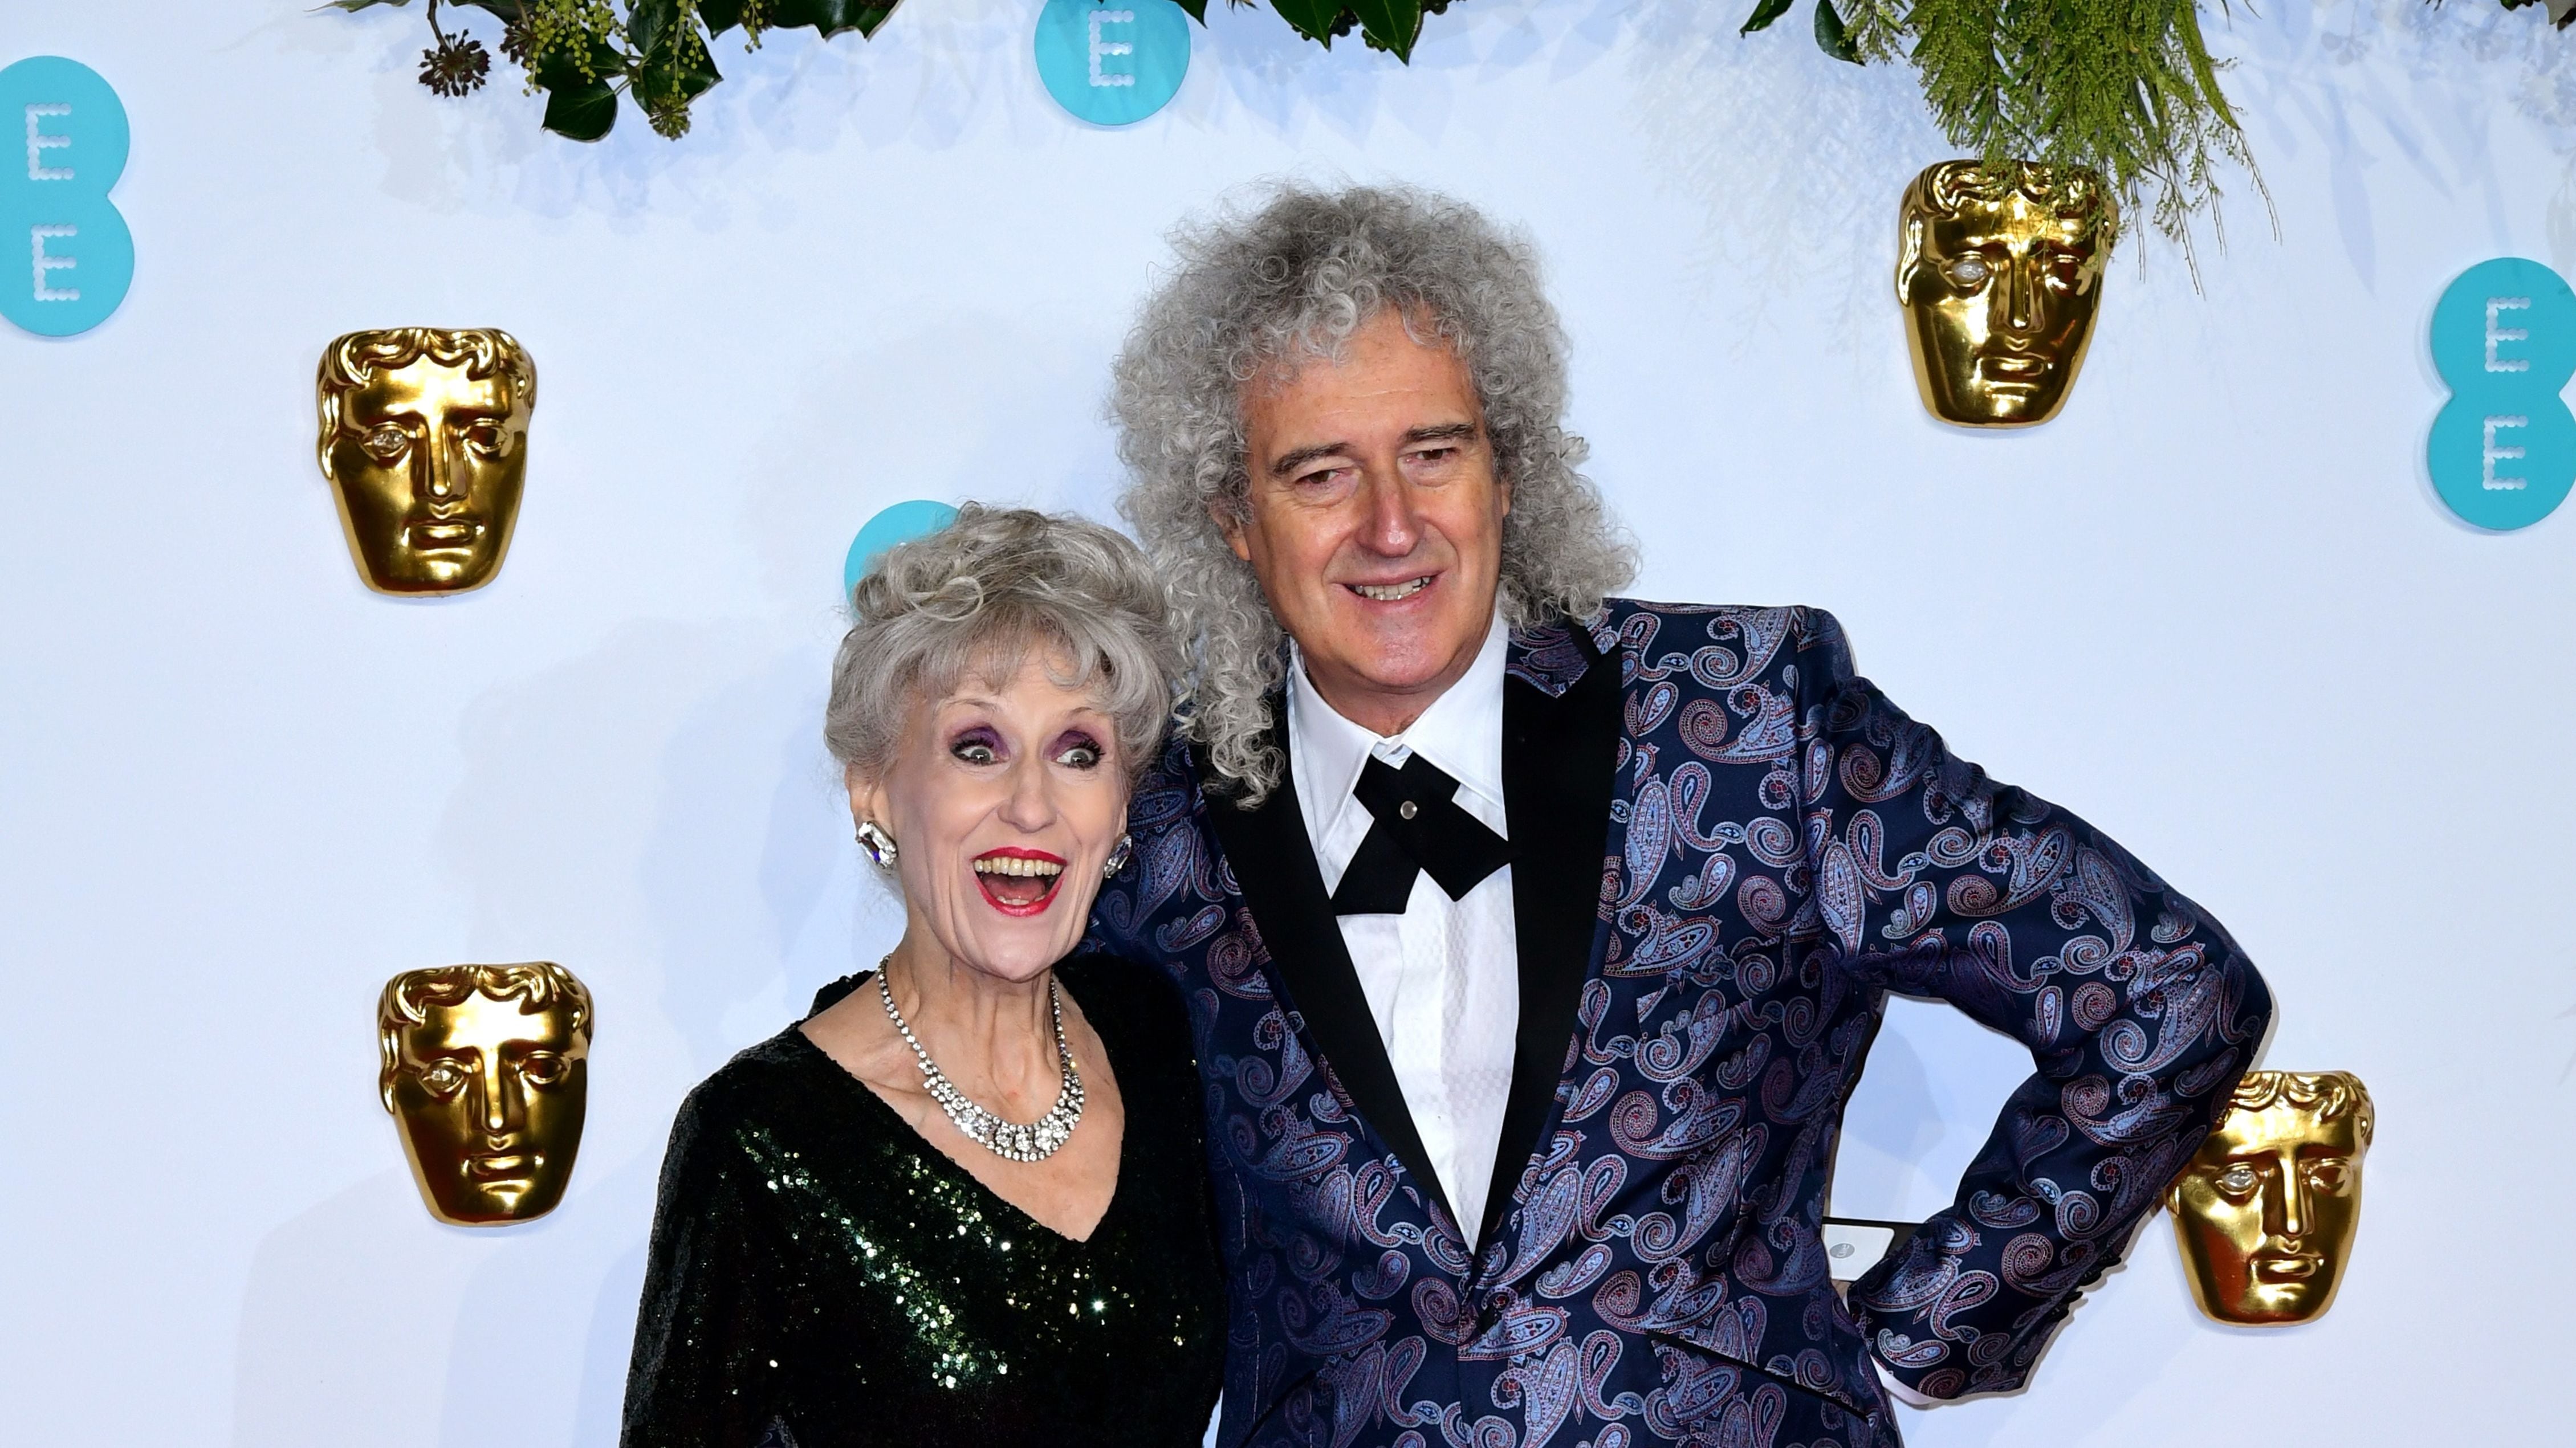 The soap actress was supporting her husband, Queen guitarist Brian May.